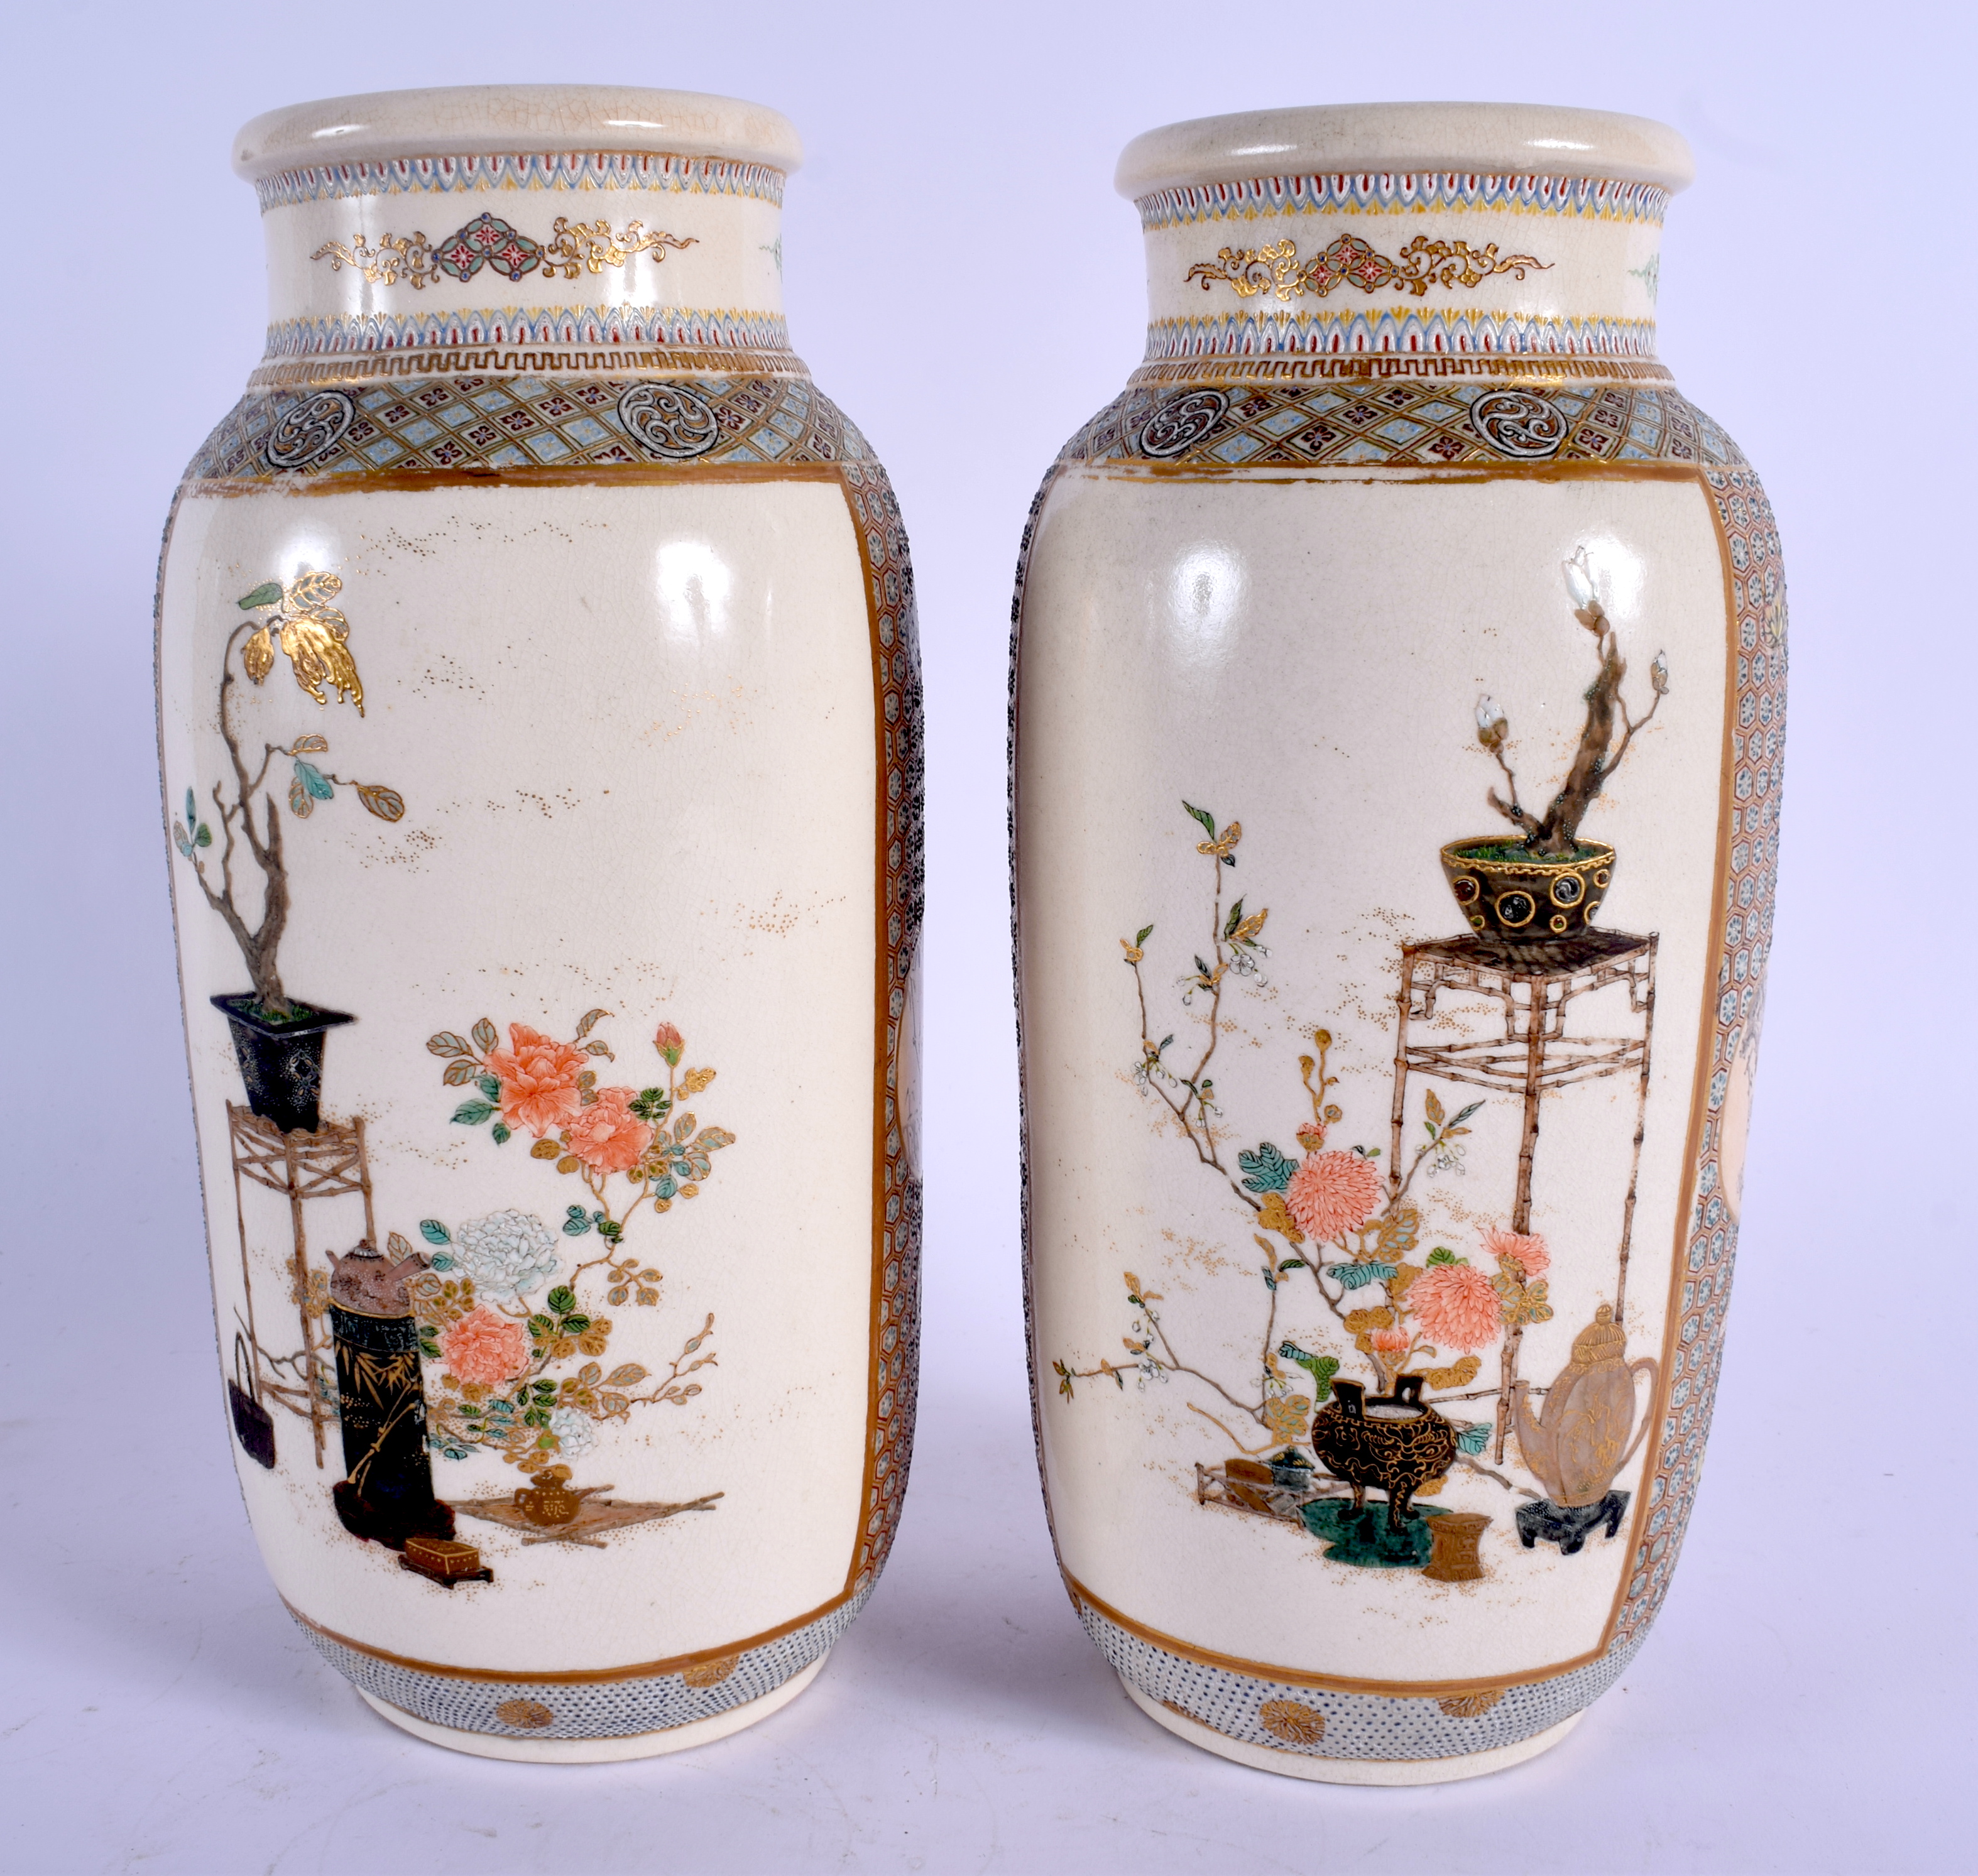 A PAIR OF 19TH CENTURY JAPANESE MEIJI PERIOD SATSUMA VASES painted with bonzai trees and high tables - Image 3 of 19